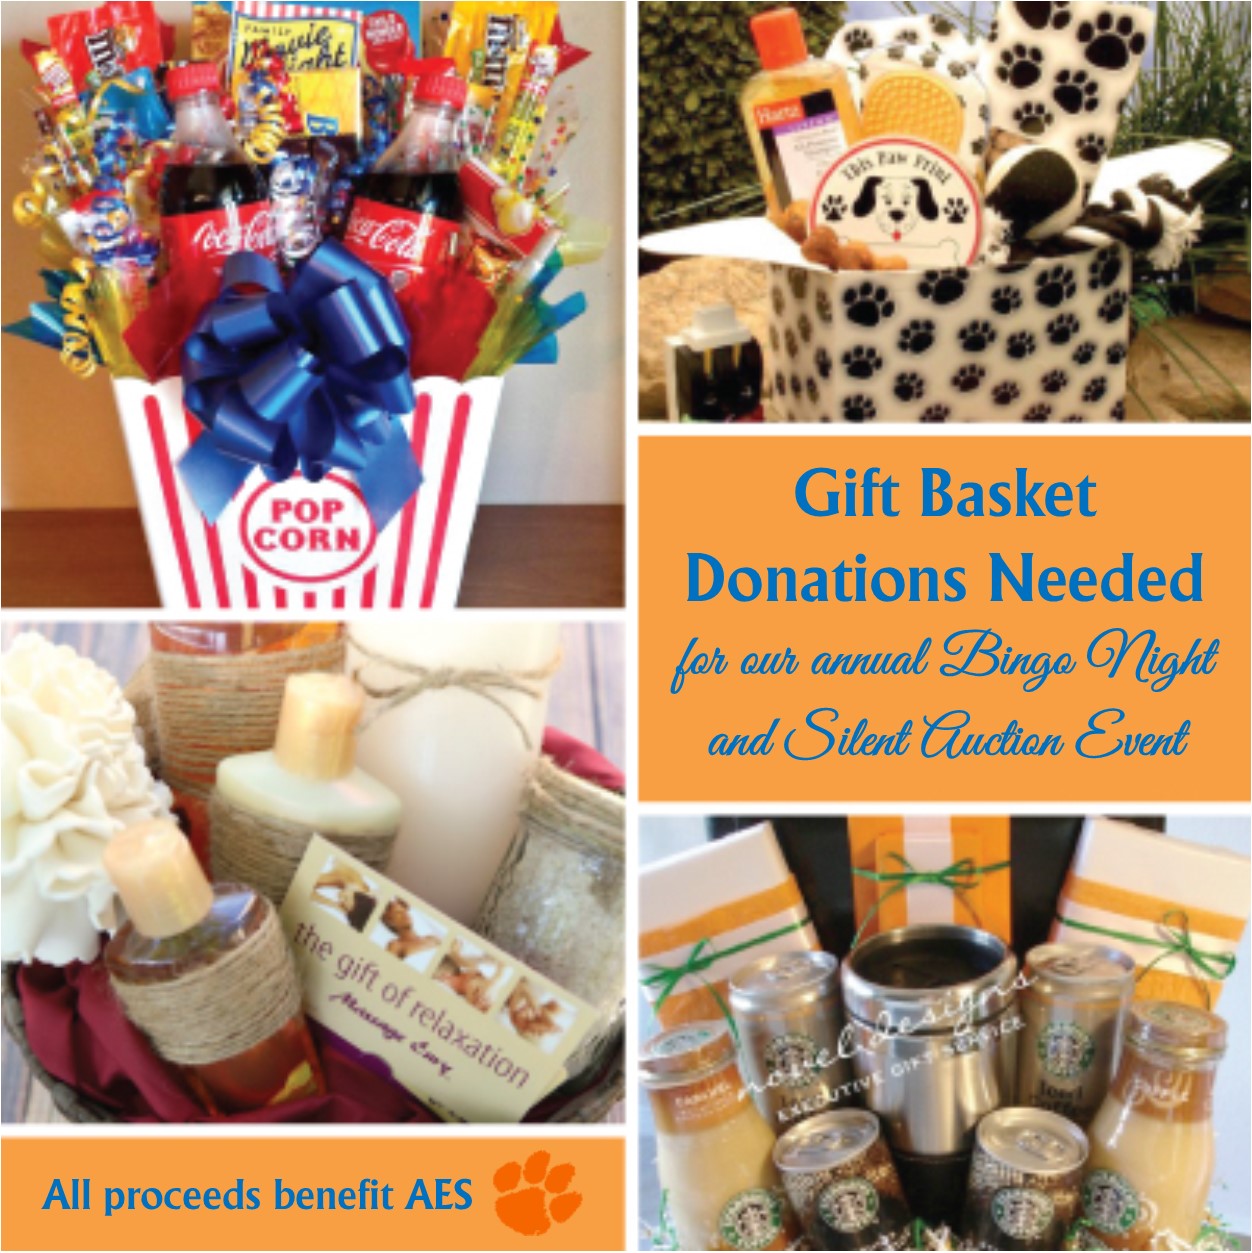 Donation for Gift Basket items for Silent Auction Fundraiser